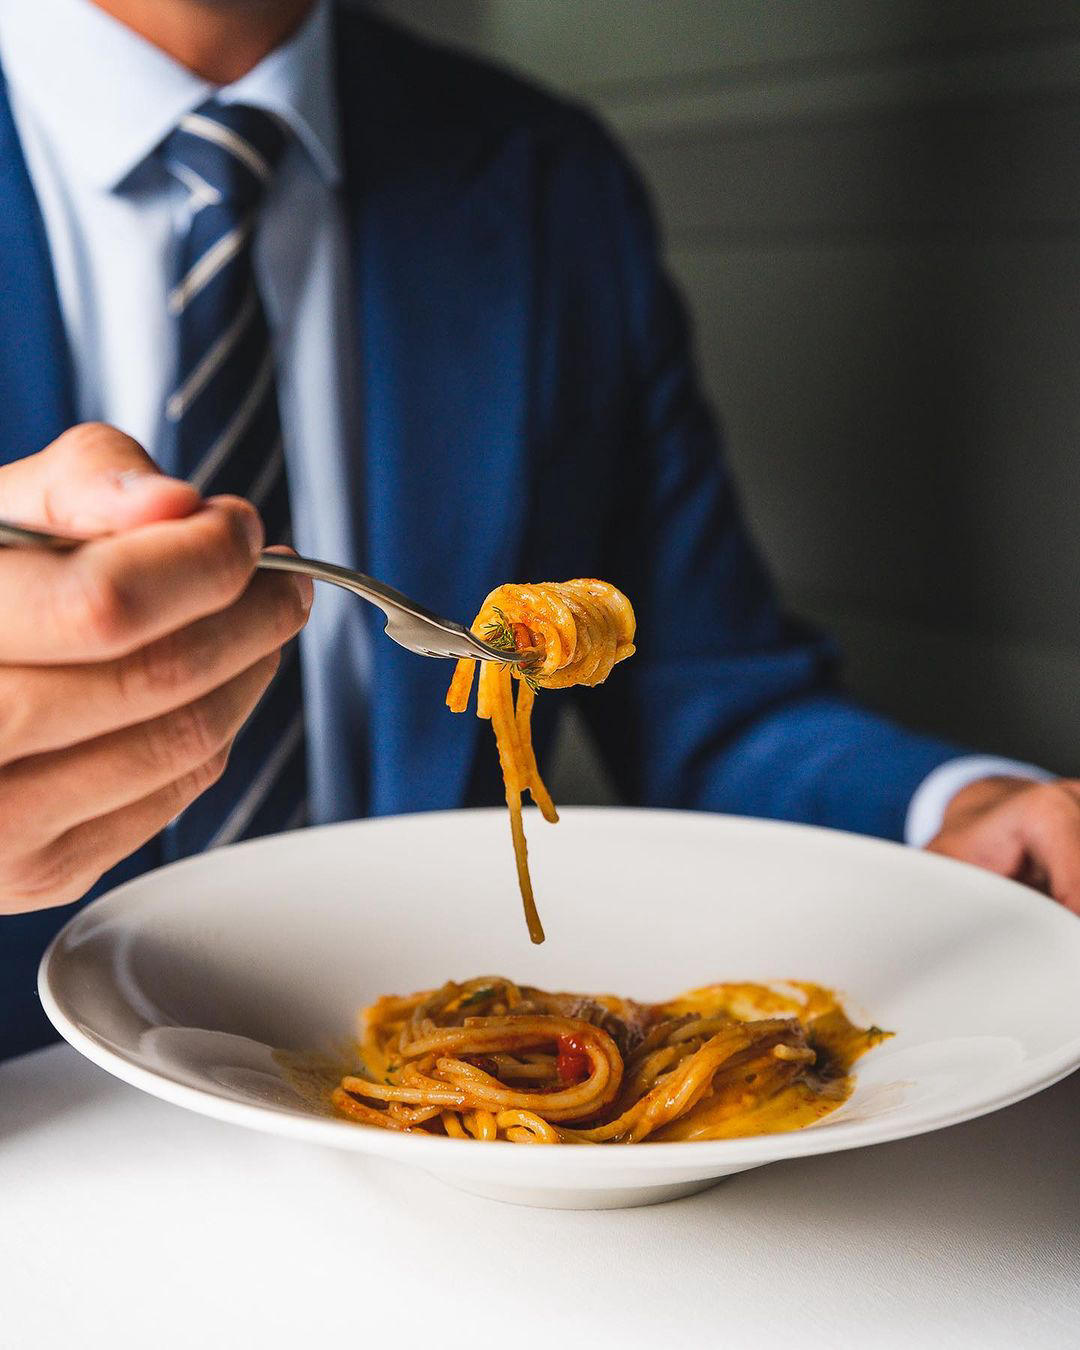 image  1 Hotel VIU Milan - Add a touch of sophistication to your business lunch - spaghetti with delectable s